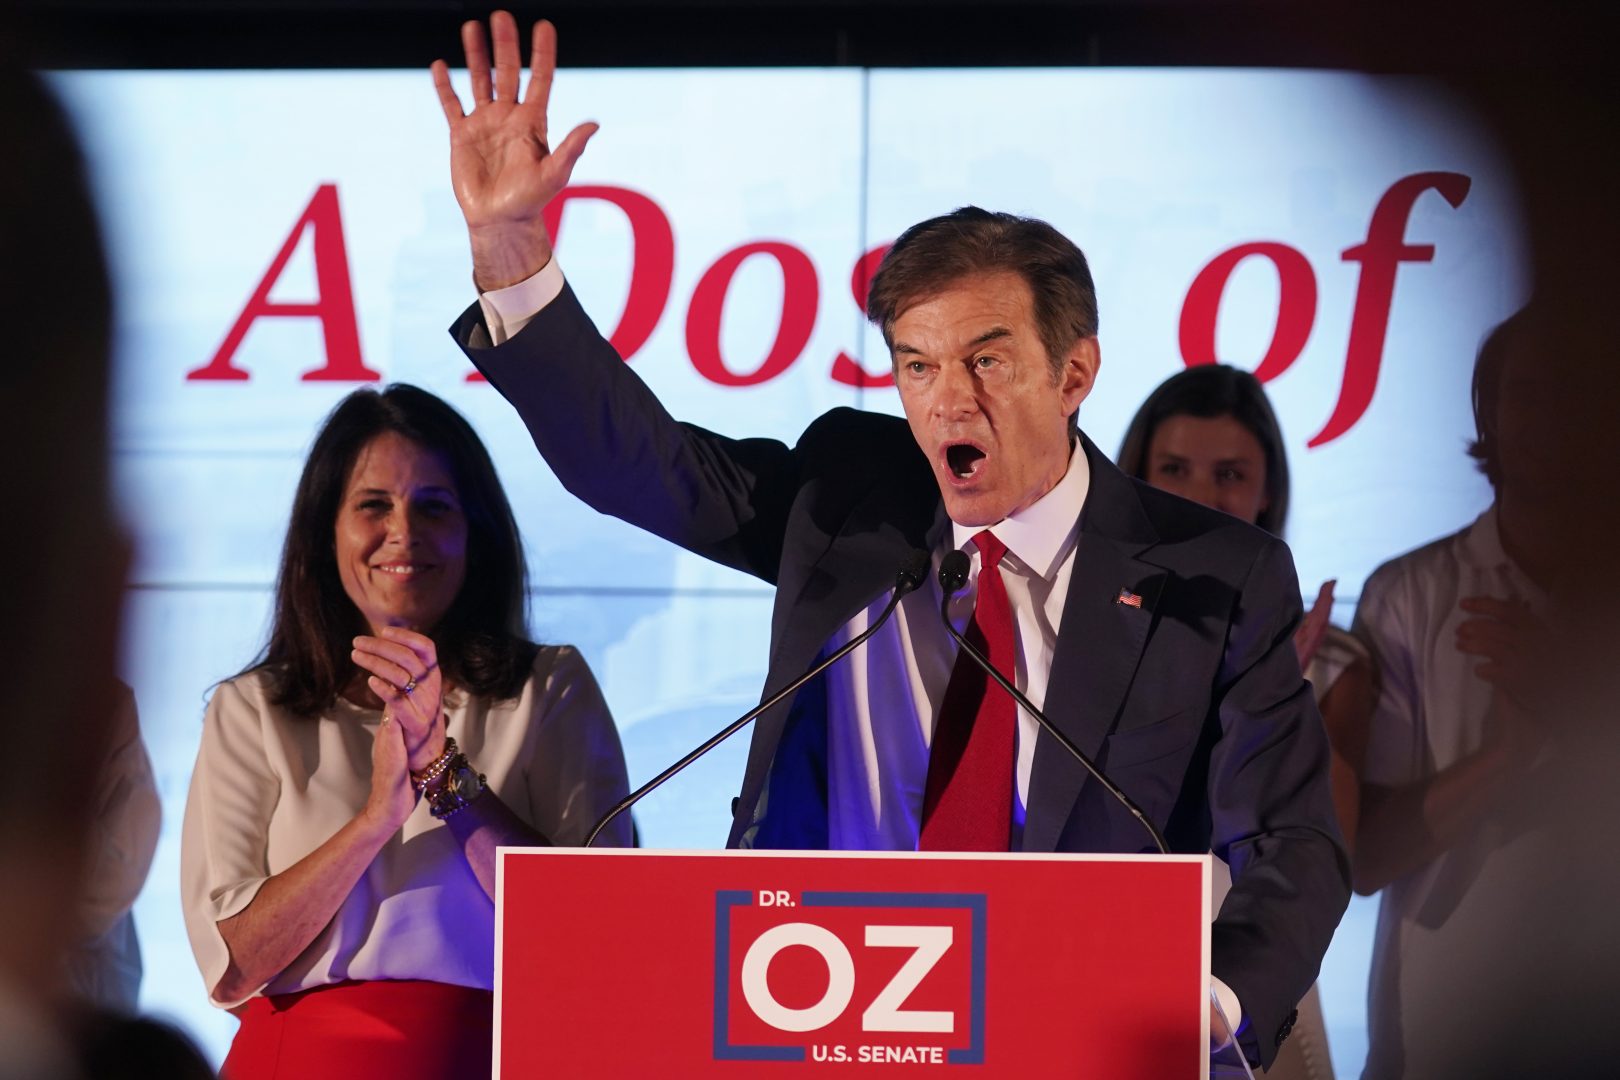 Mehmet Oz, a Republican candidate for U.S. Senate in Pennsylvania, right, waves in front of his wife, Lisa, while speaking at a primary night election gathering in Newtown, Pa., Tuesday, May 17, 2022.